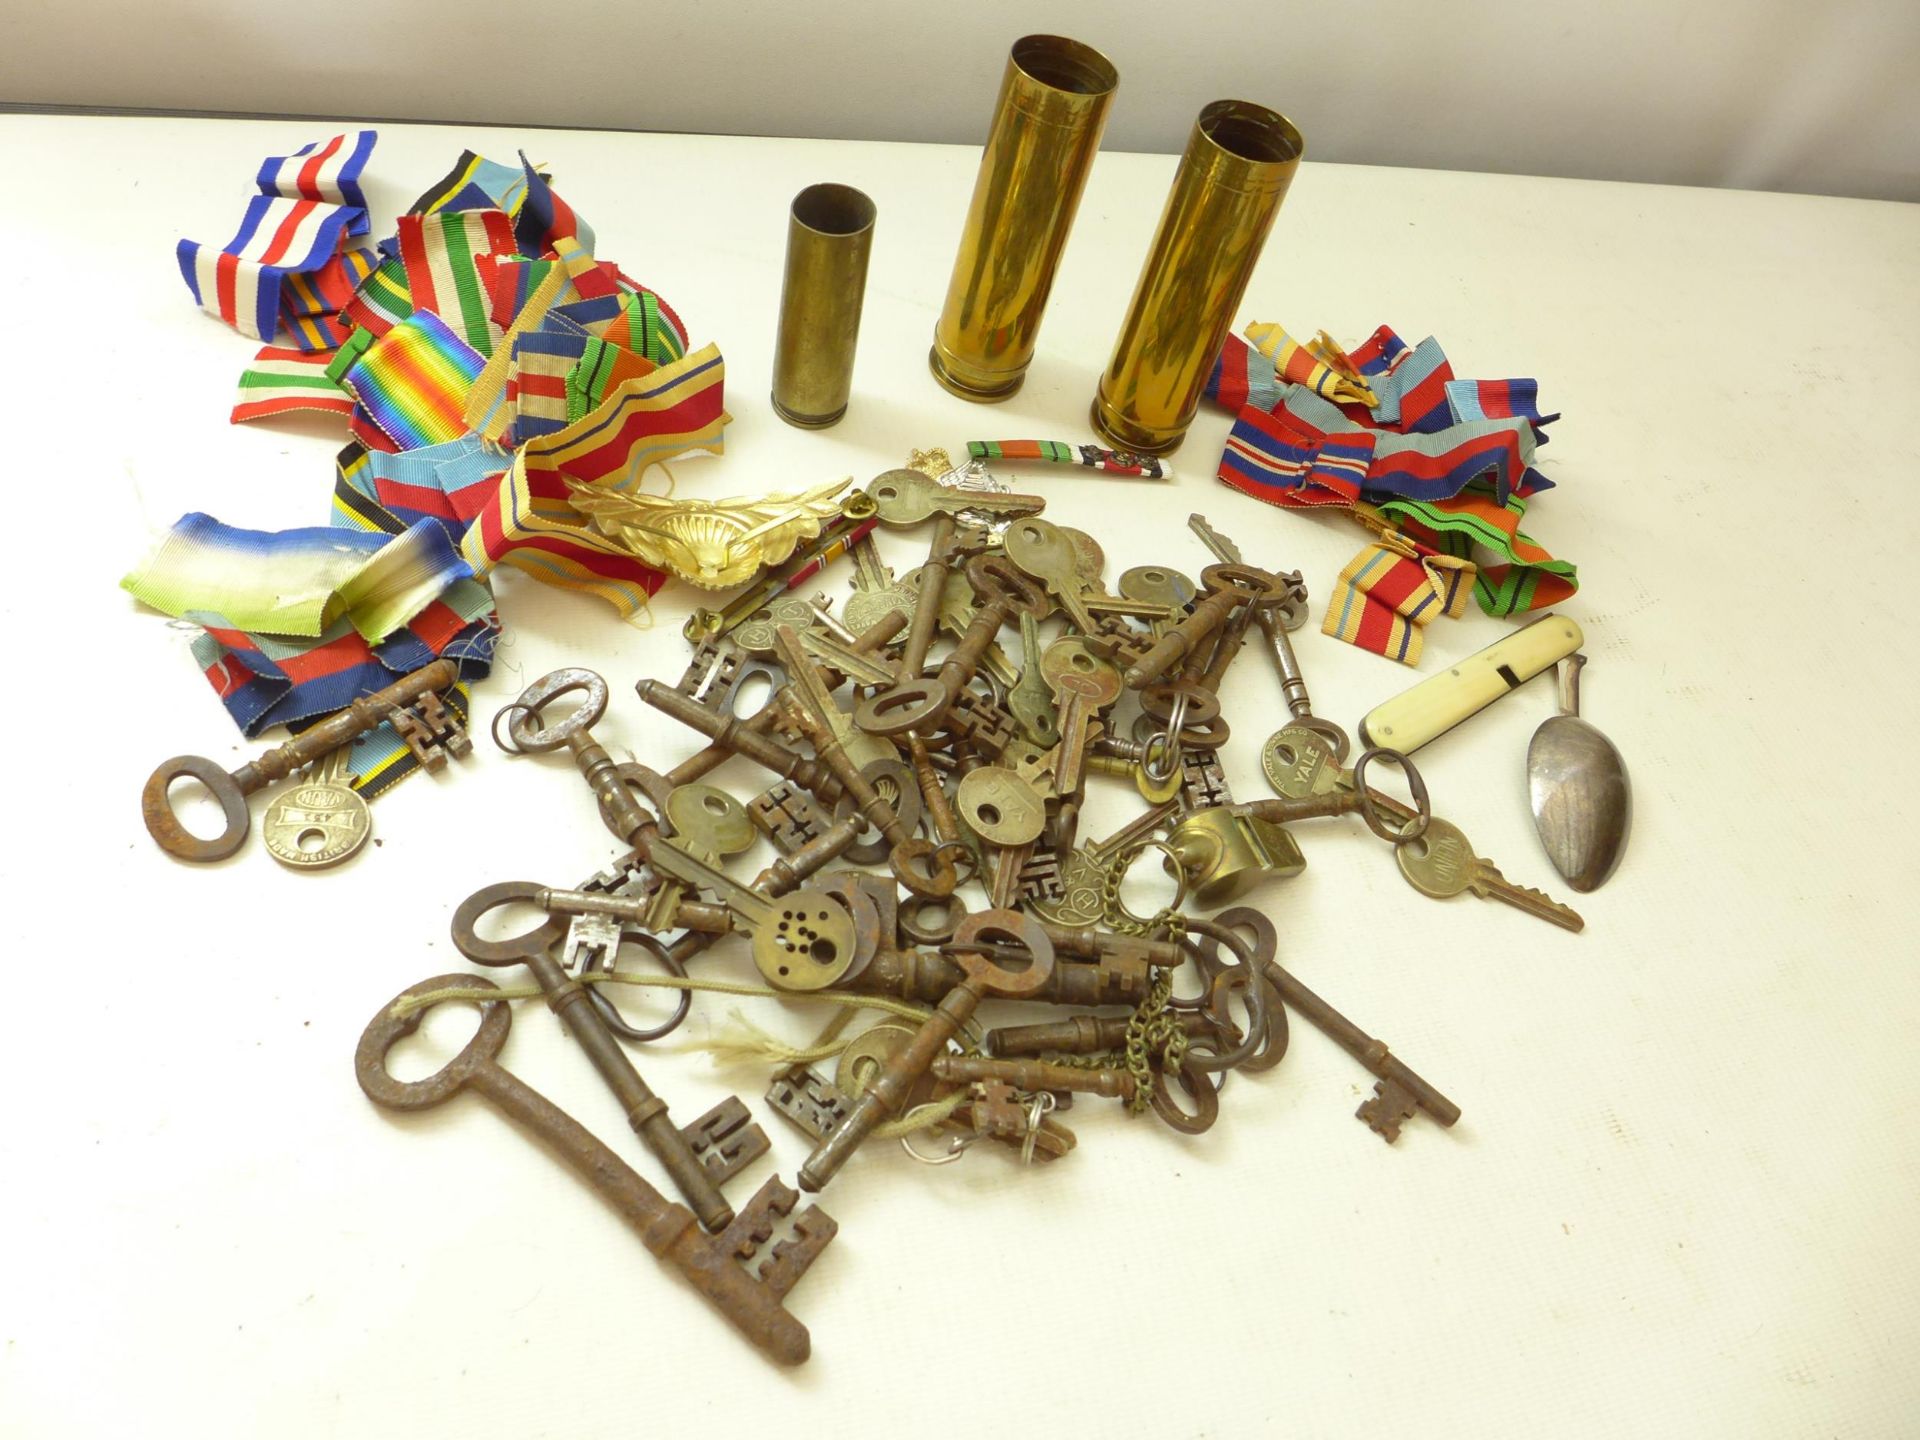 THREE BRASS SHELL CASES, HEIGHTS 7CM TO 11CM, MEDAL RIBBONS, KEYS ETC